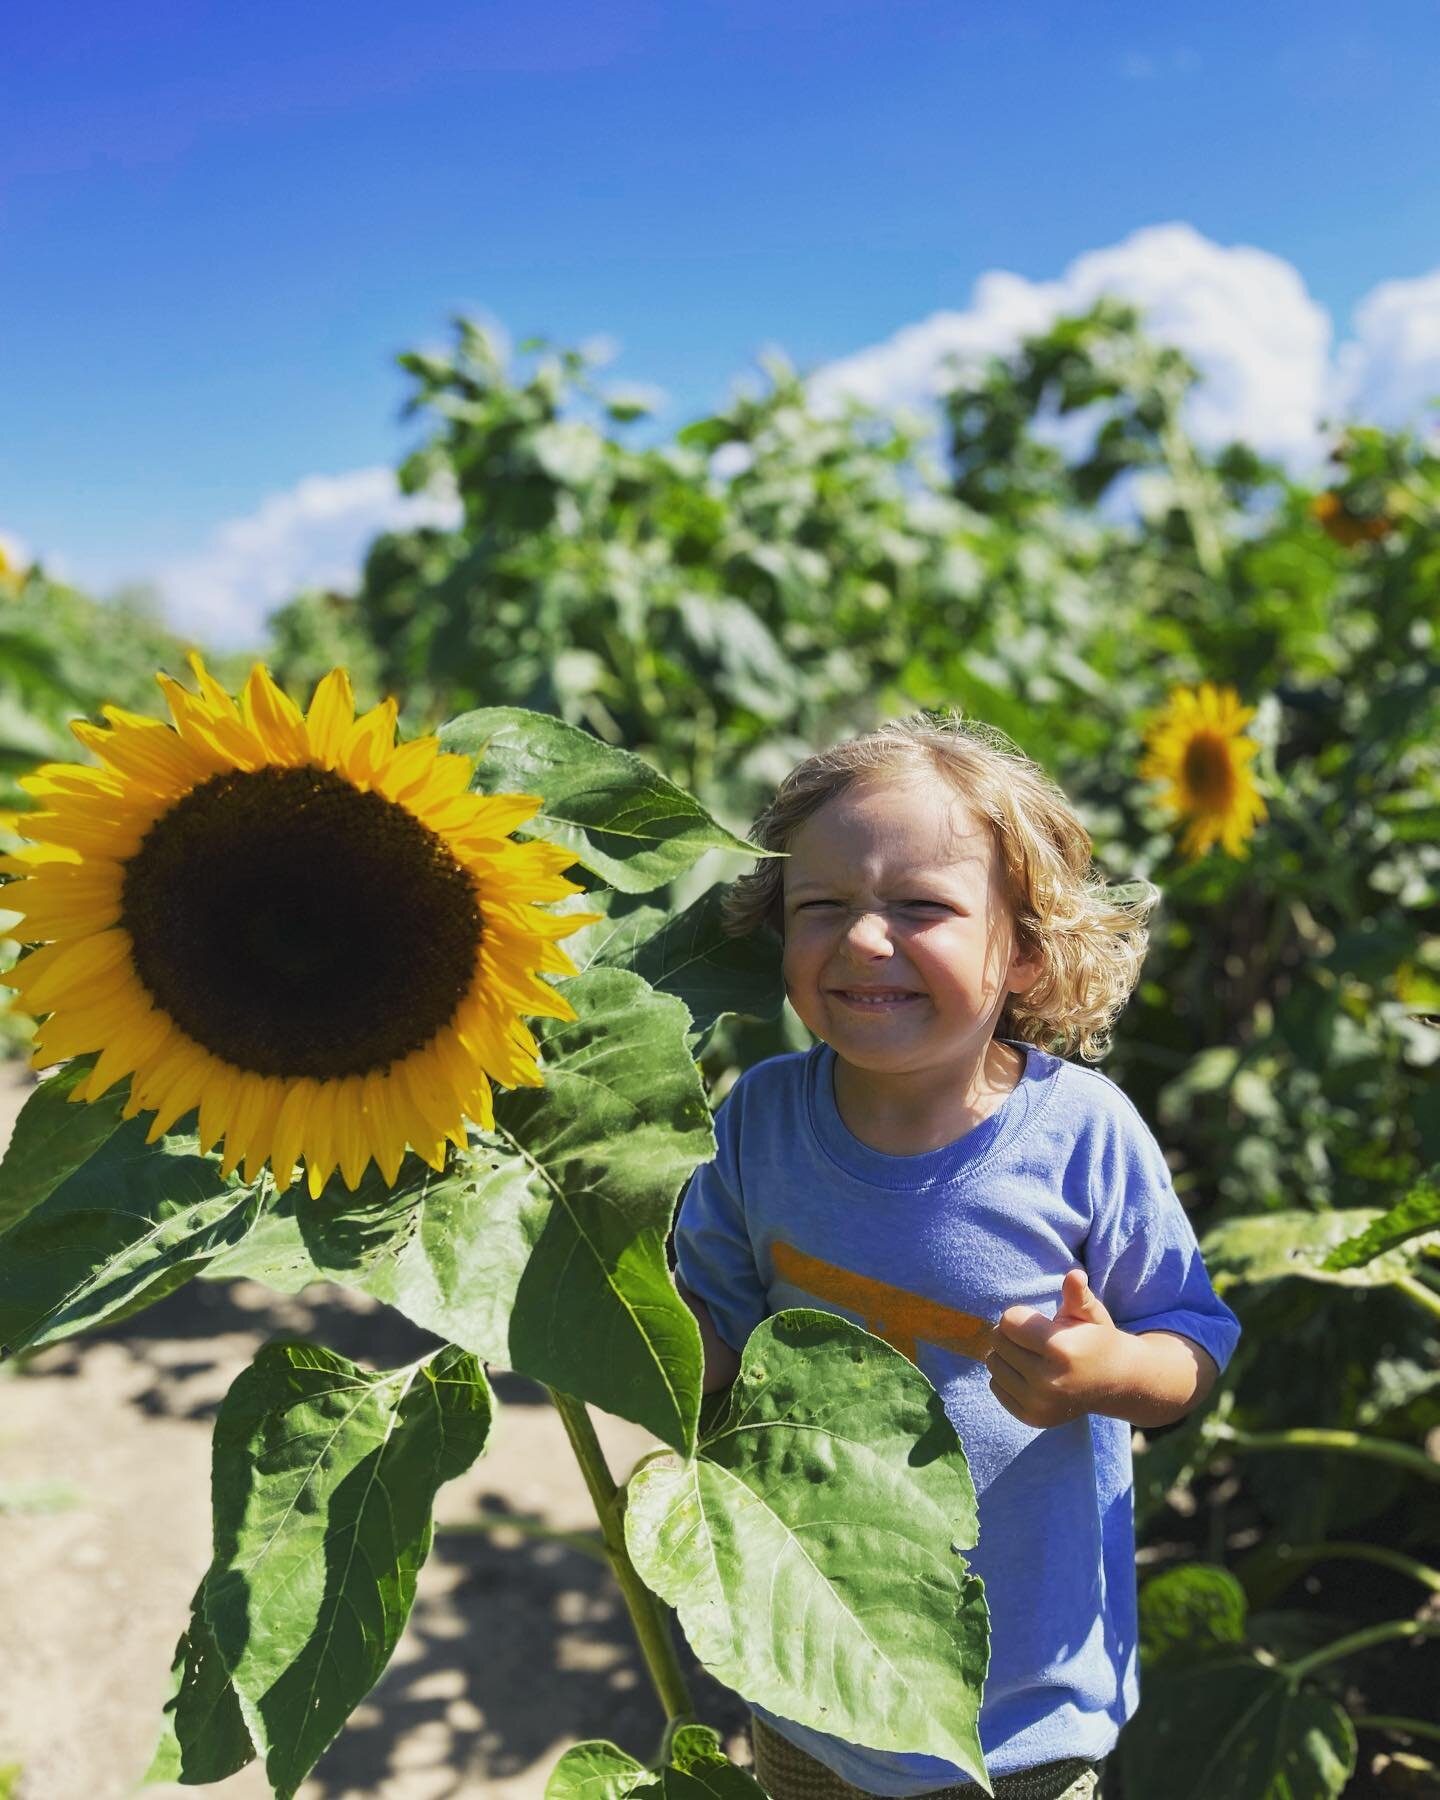 I feel terrible about this sunflower.

Bo and I took a tractor ride in a sunflower field today and we were allowed to clip our very own sunflower to take home. And while it was fun in the moment and Bo really likes his sunflower - I feel sick to my s